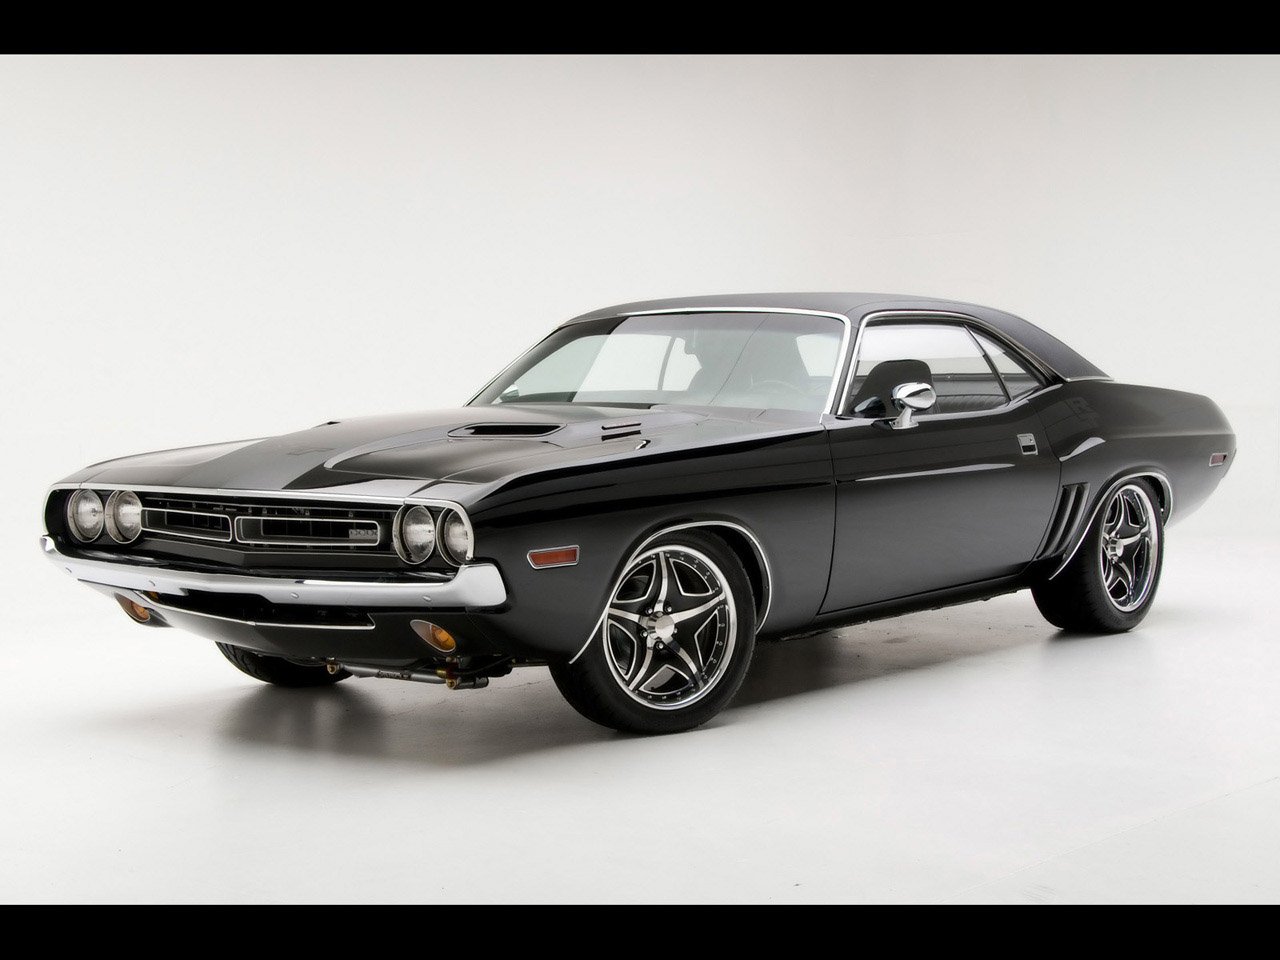 Hd Car wallpapers cool muscle car wallpapers 1280x960